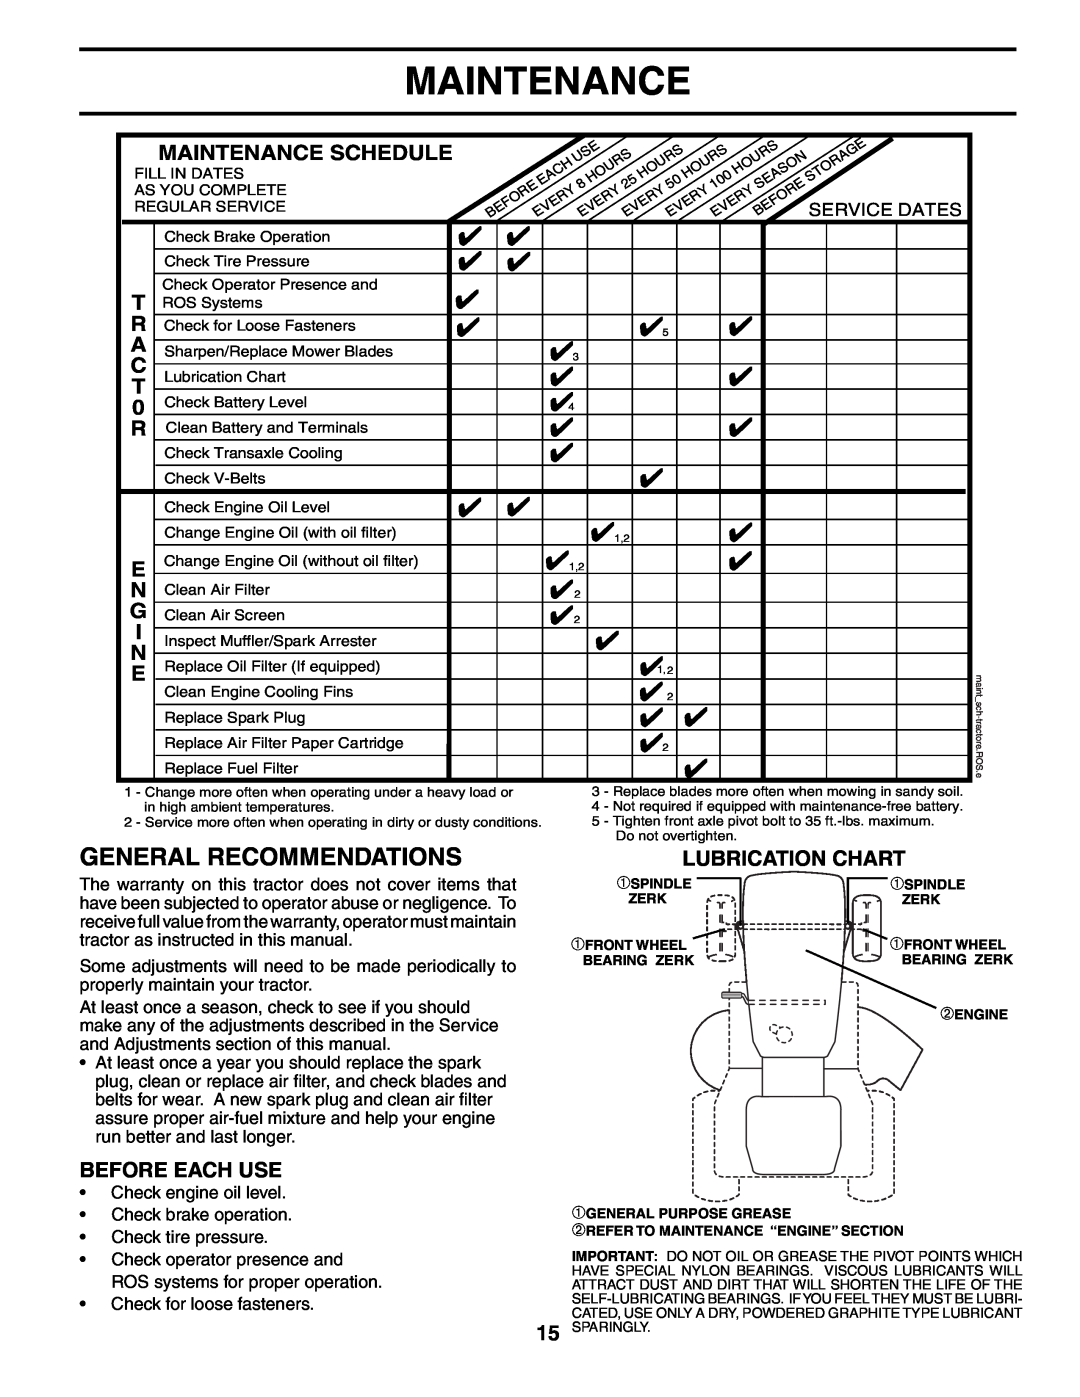 Poulan BB185H42YT manual General Recommendations, Lubrication Chart, Before Each Use, Maintenance Schedule 